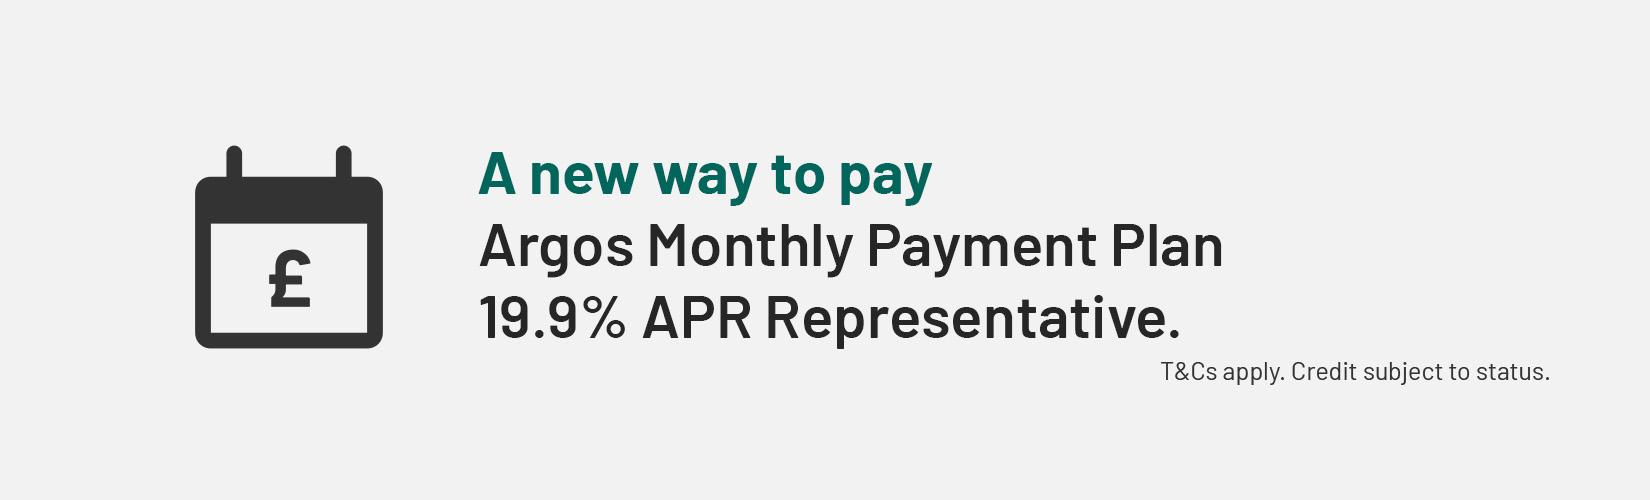 A new way to pay. Argos monthly payment plan. 19.9% APR representative. T&C apply. Credit subject to status.